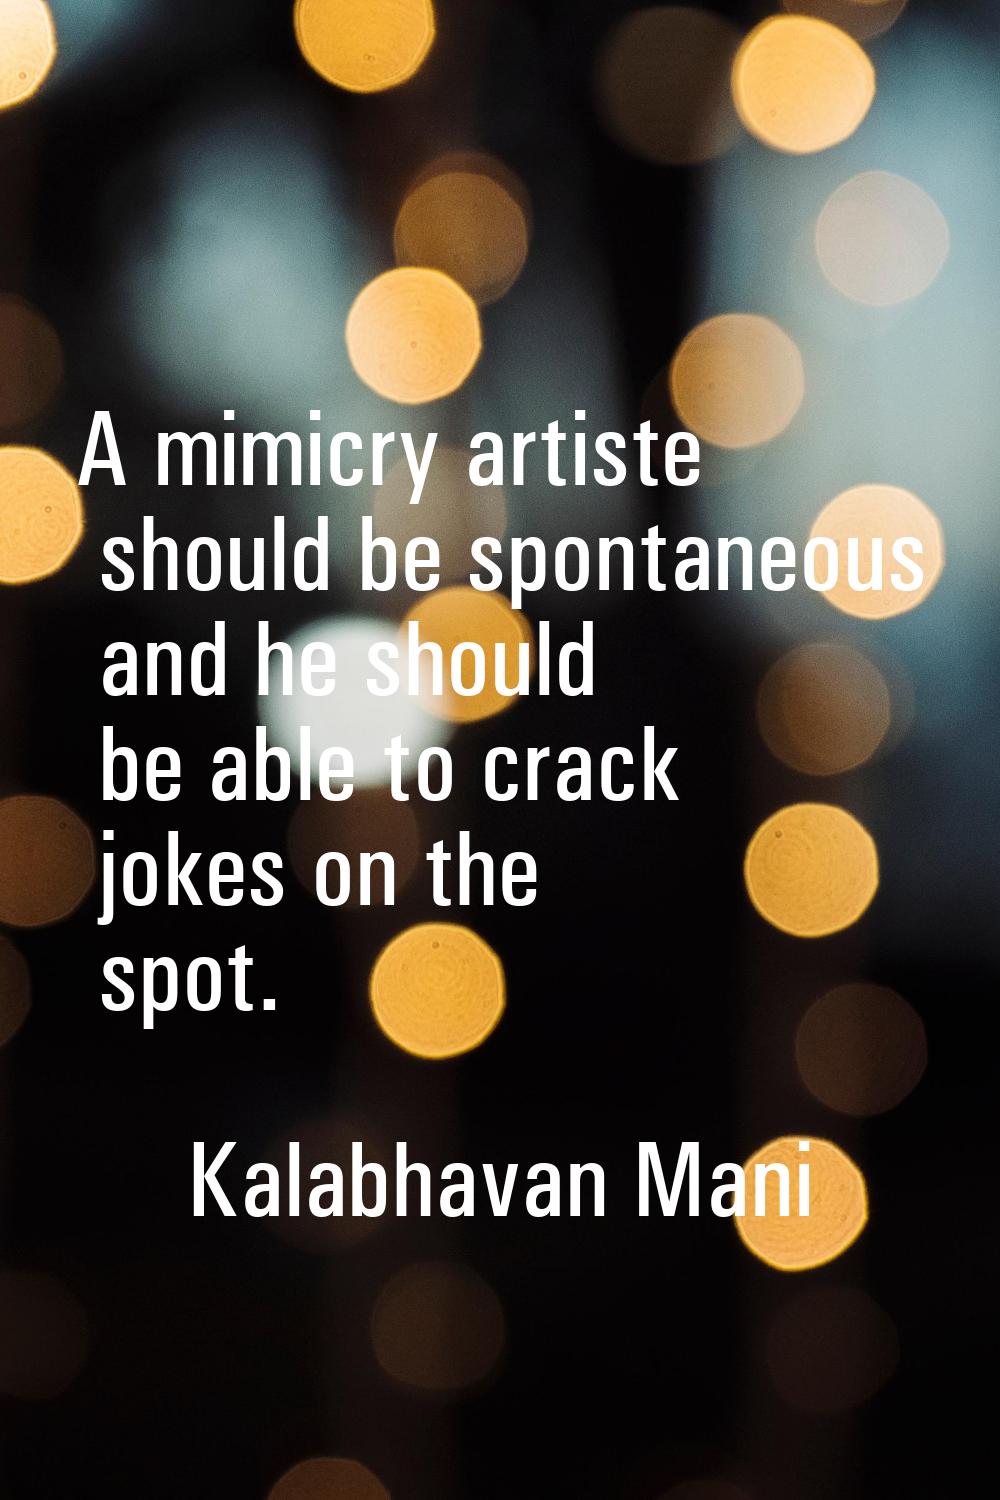 A mimicry artiste should be spontaneous and he should be able to crack jokes on the spot.